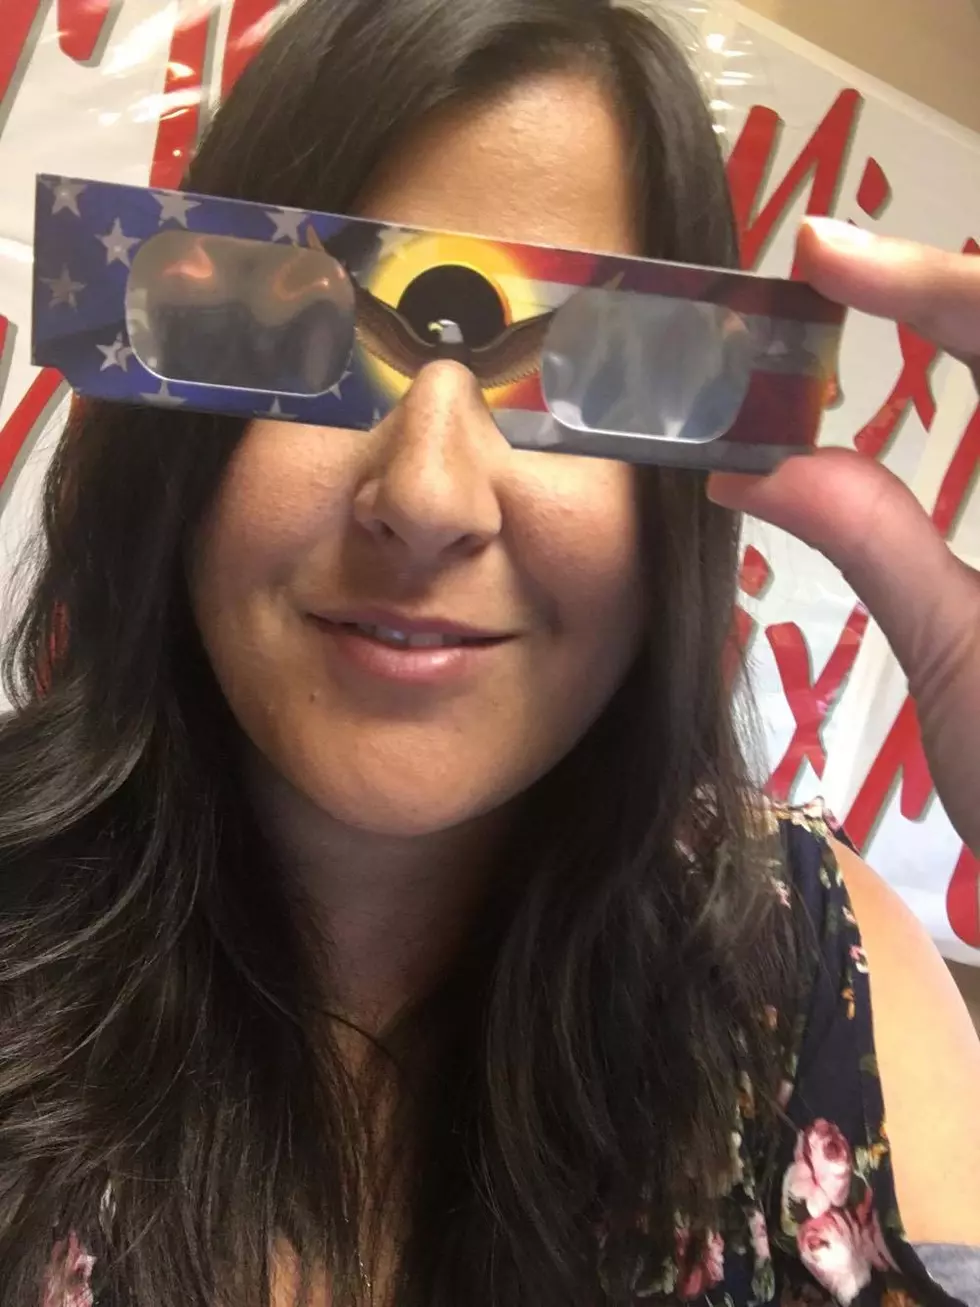 If You Got Your Eclipse Viewing Glasses Here, Do Not Use Them